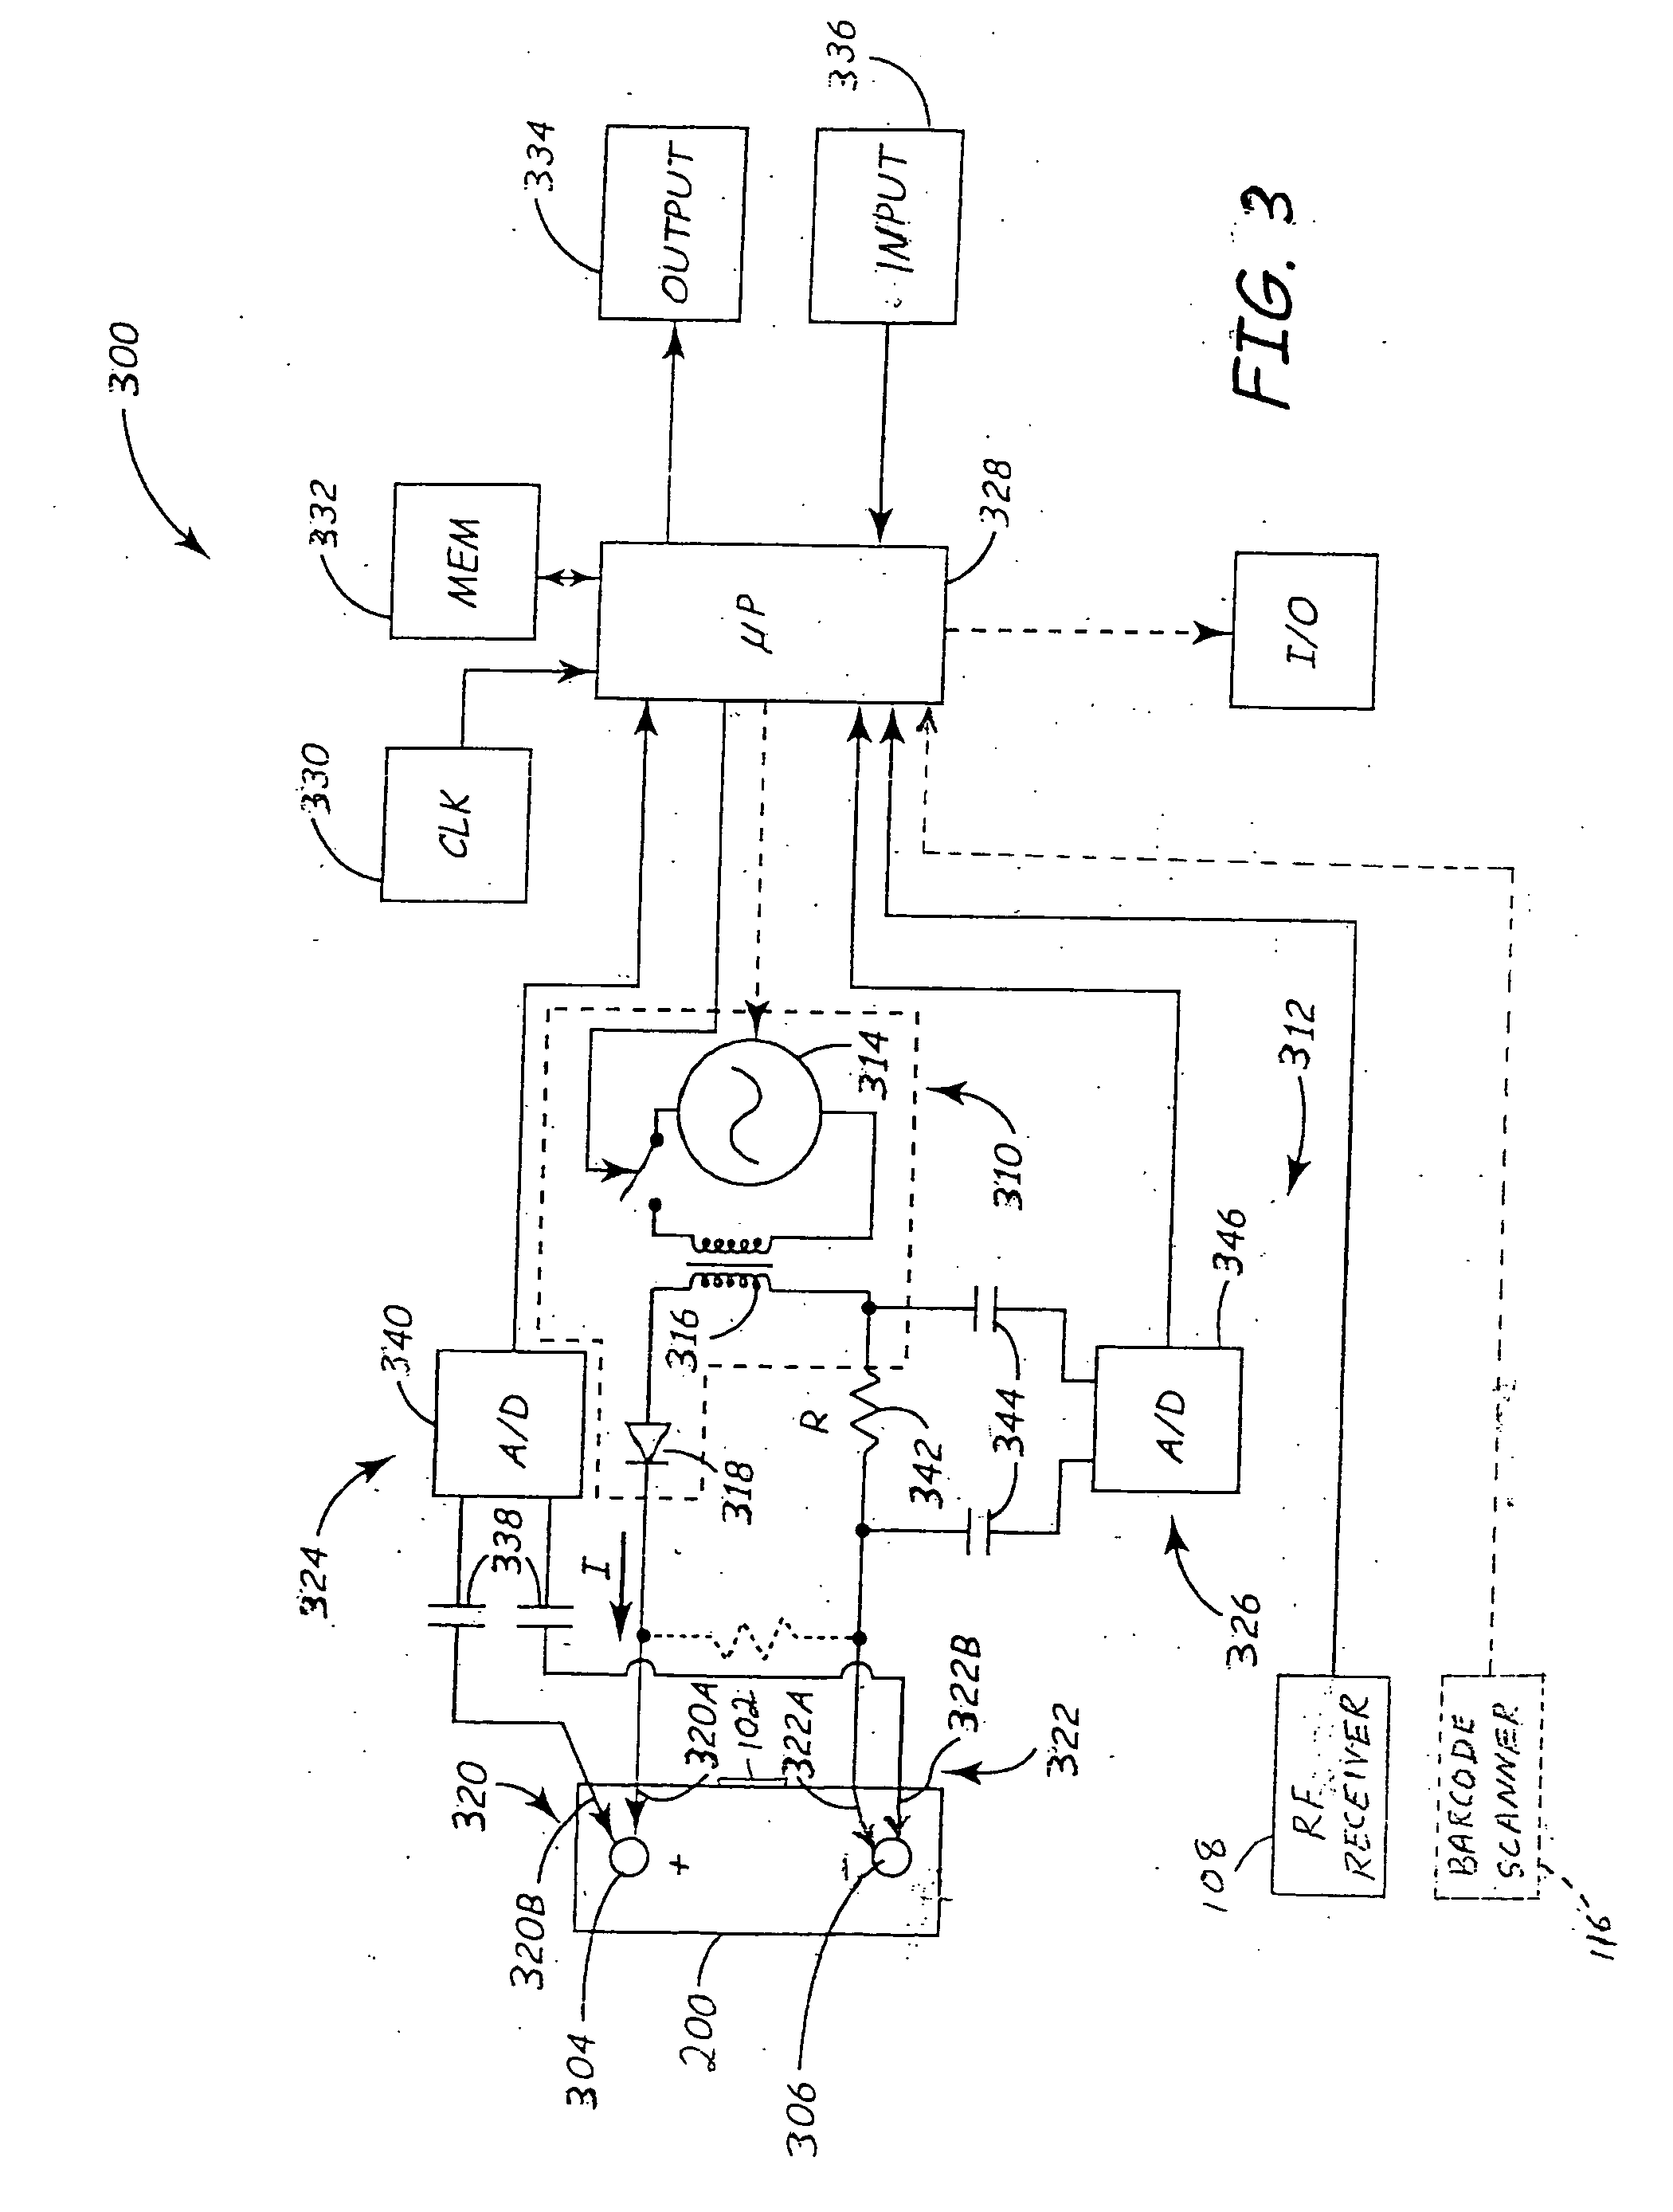 System for automatically gathering battery information for use during battery testing/charging